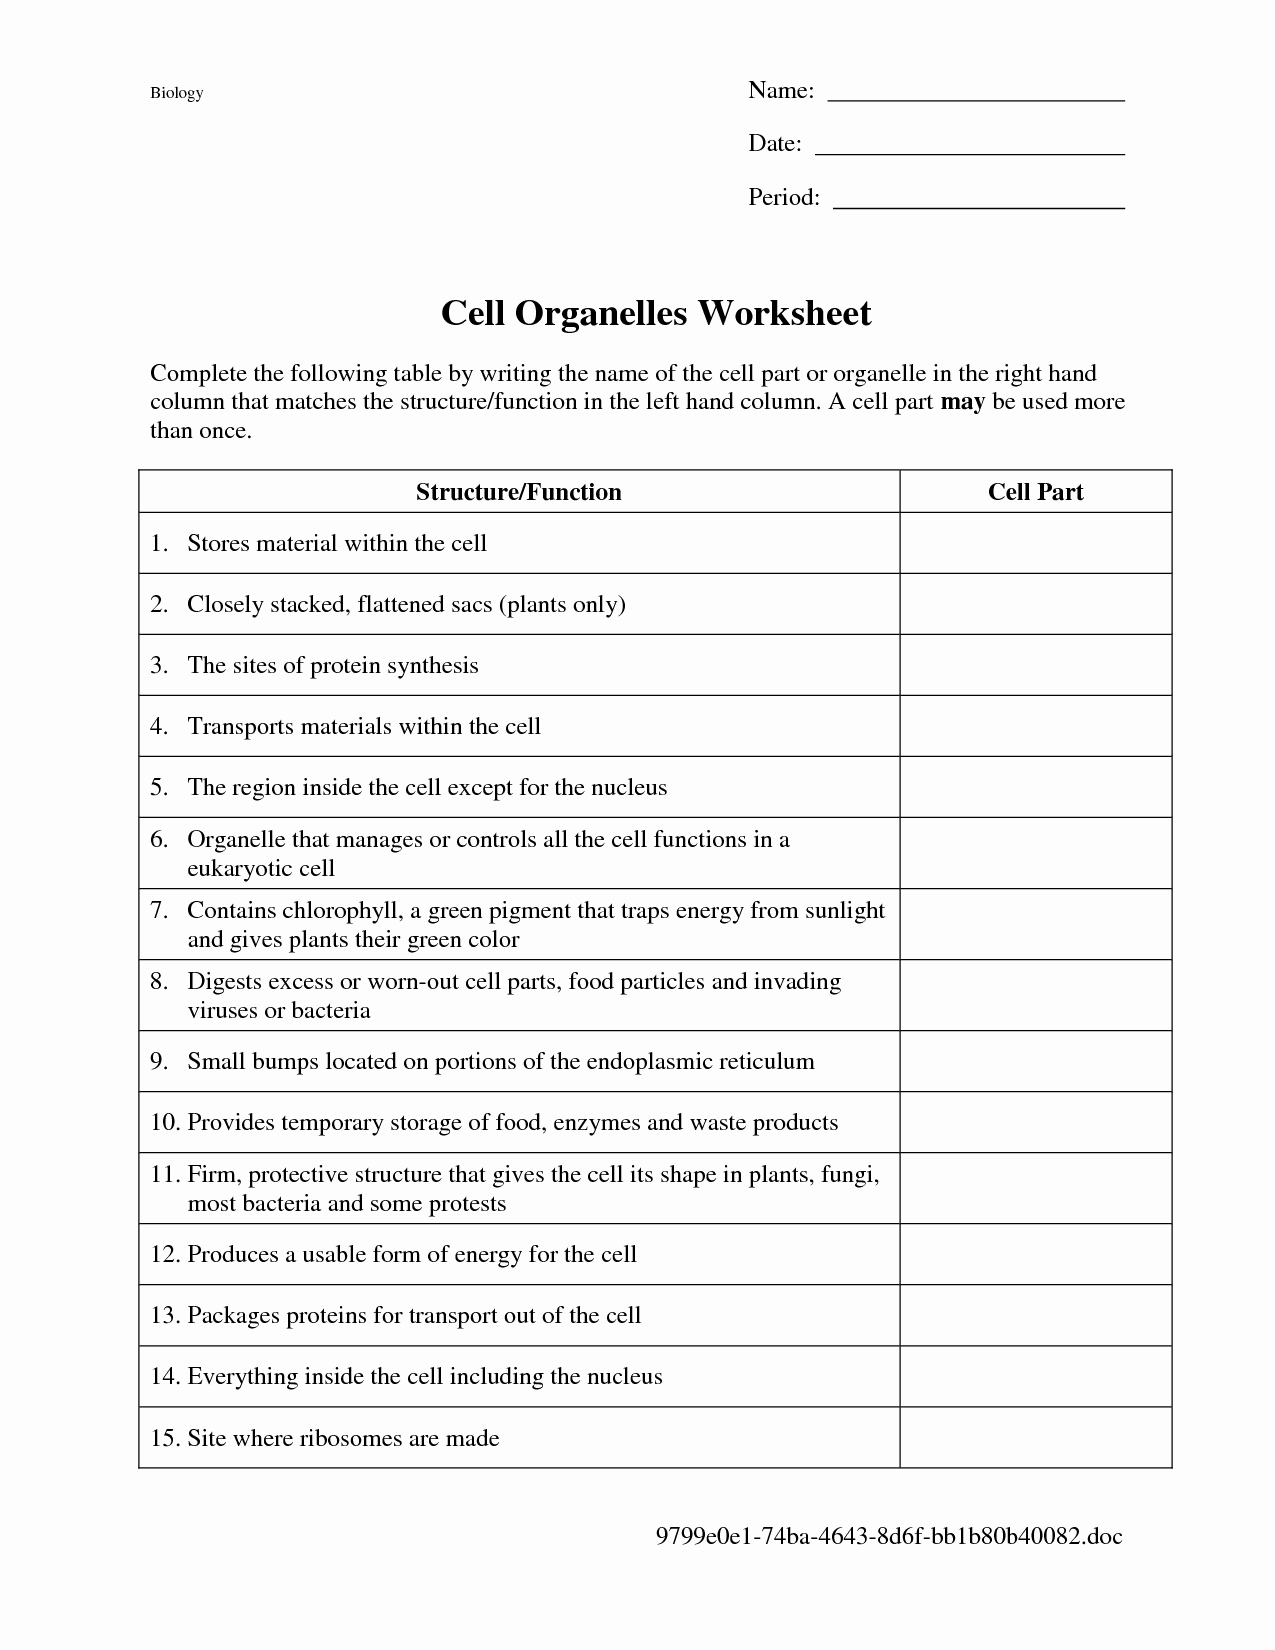 Function Of the organelles Worksheet Inspirational 12 Best Of Life Science Worksheet Answer Cell